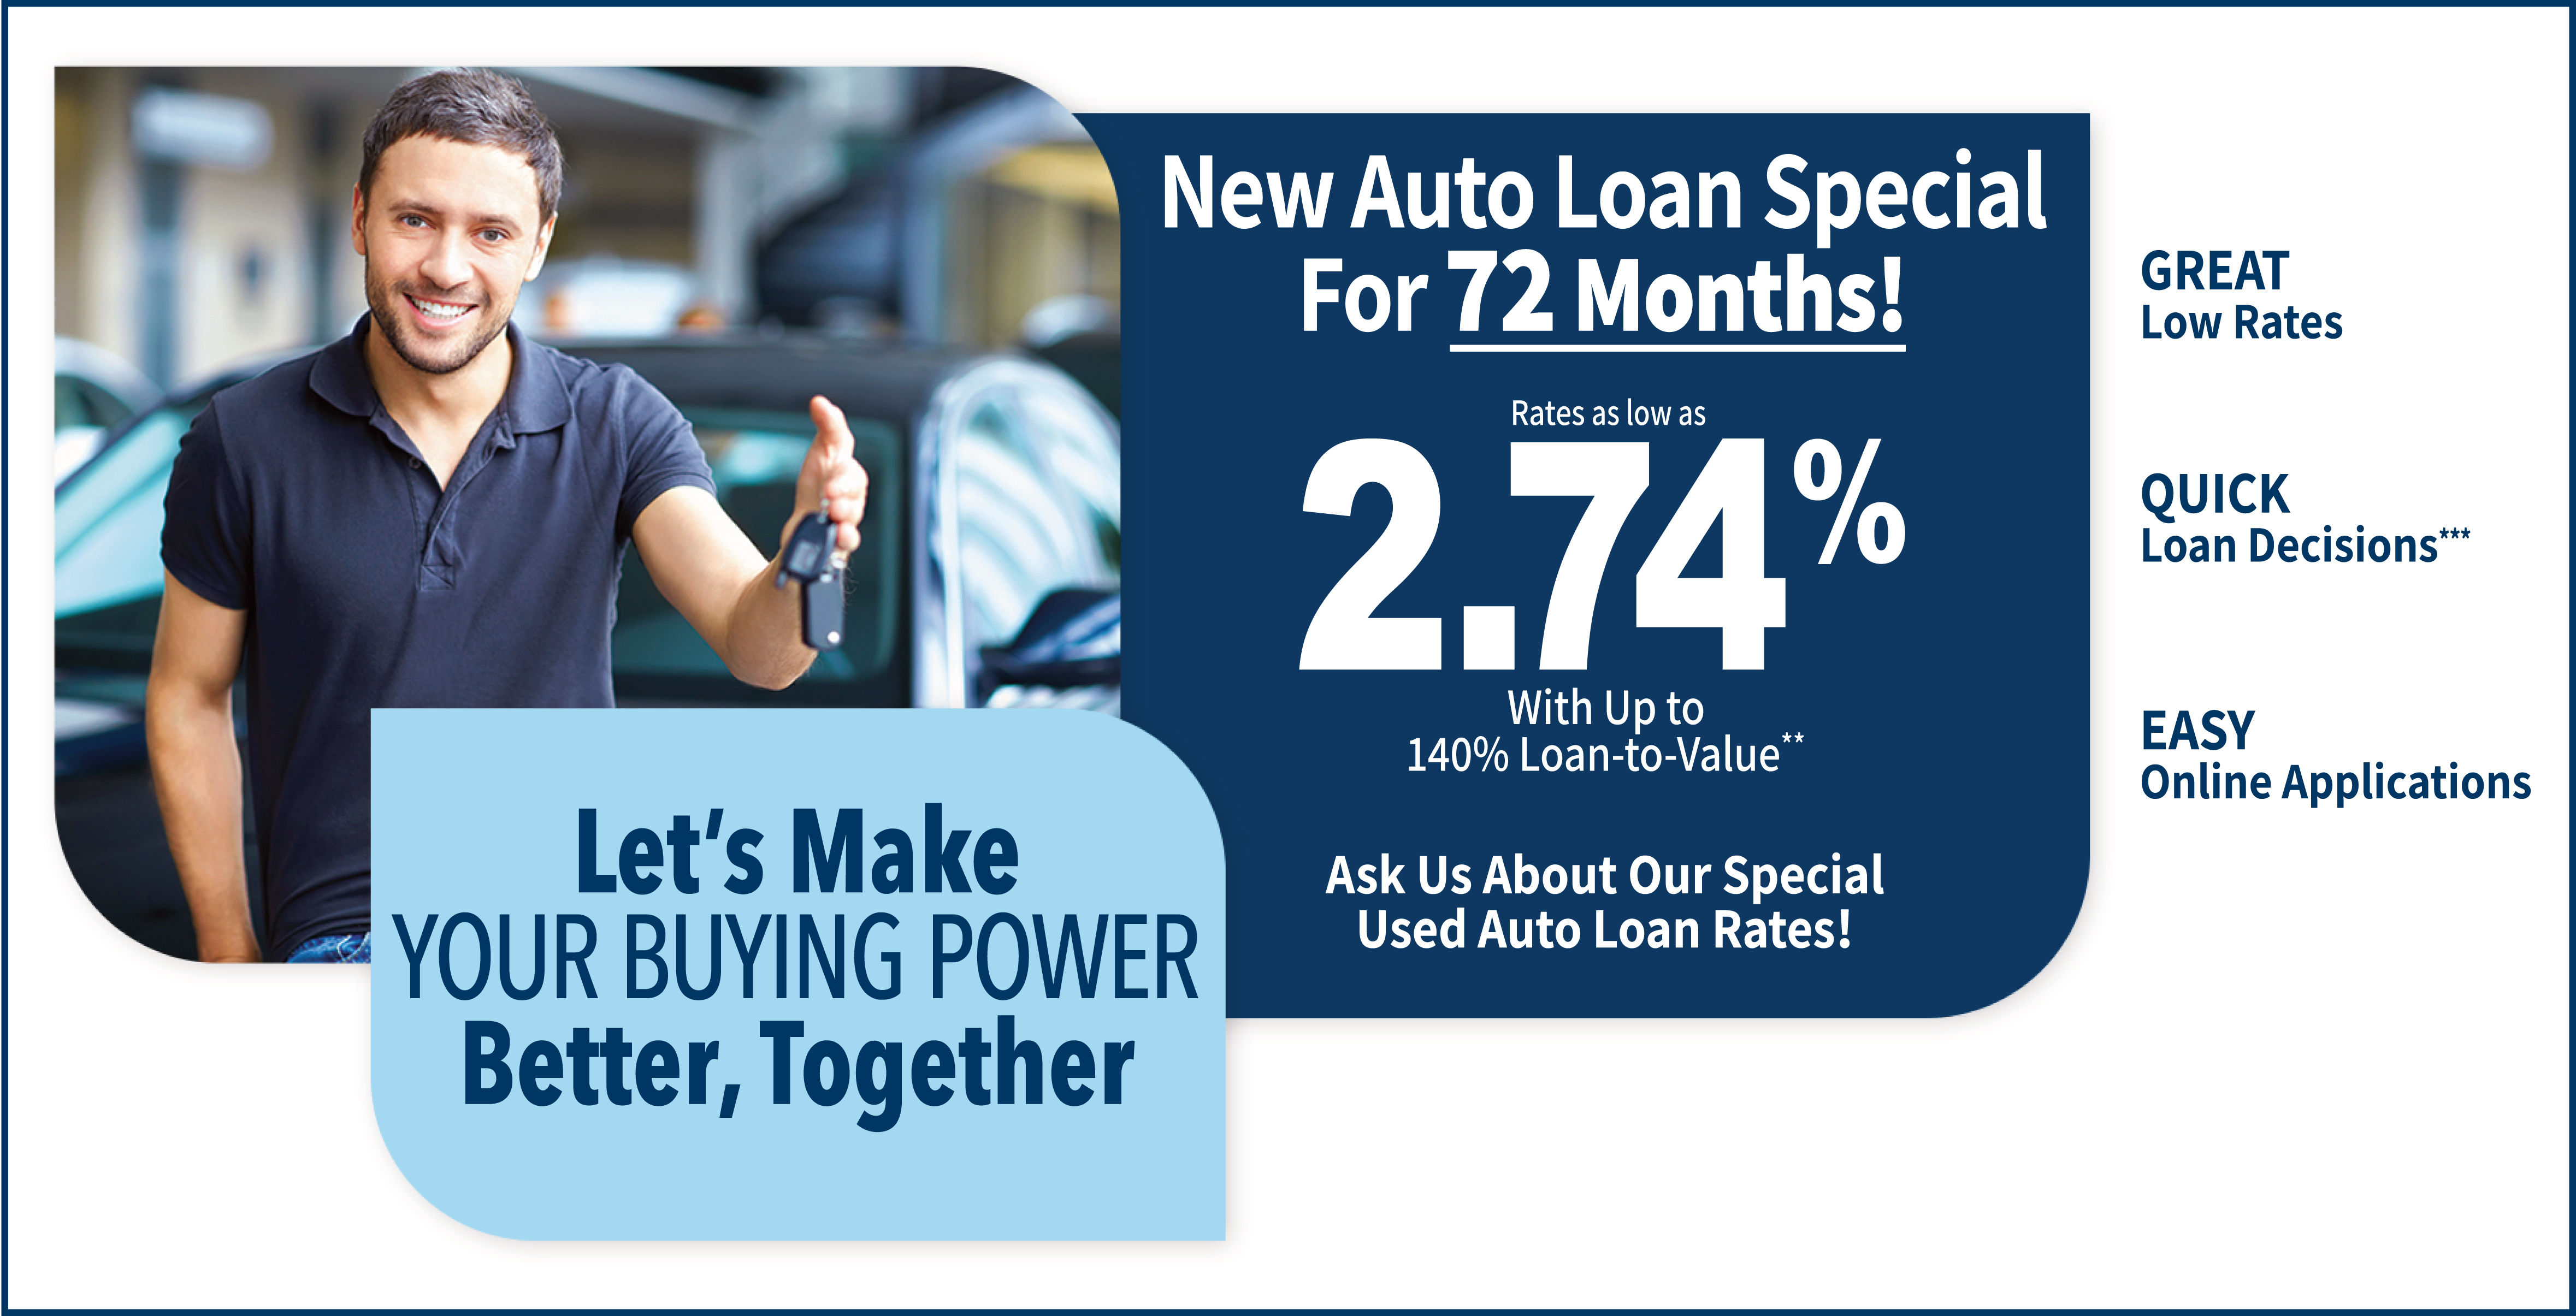 New Auto Loan Special. Rates as low as 2.74% APR for a 72 month term